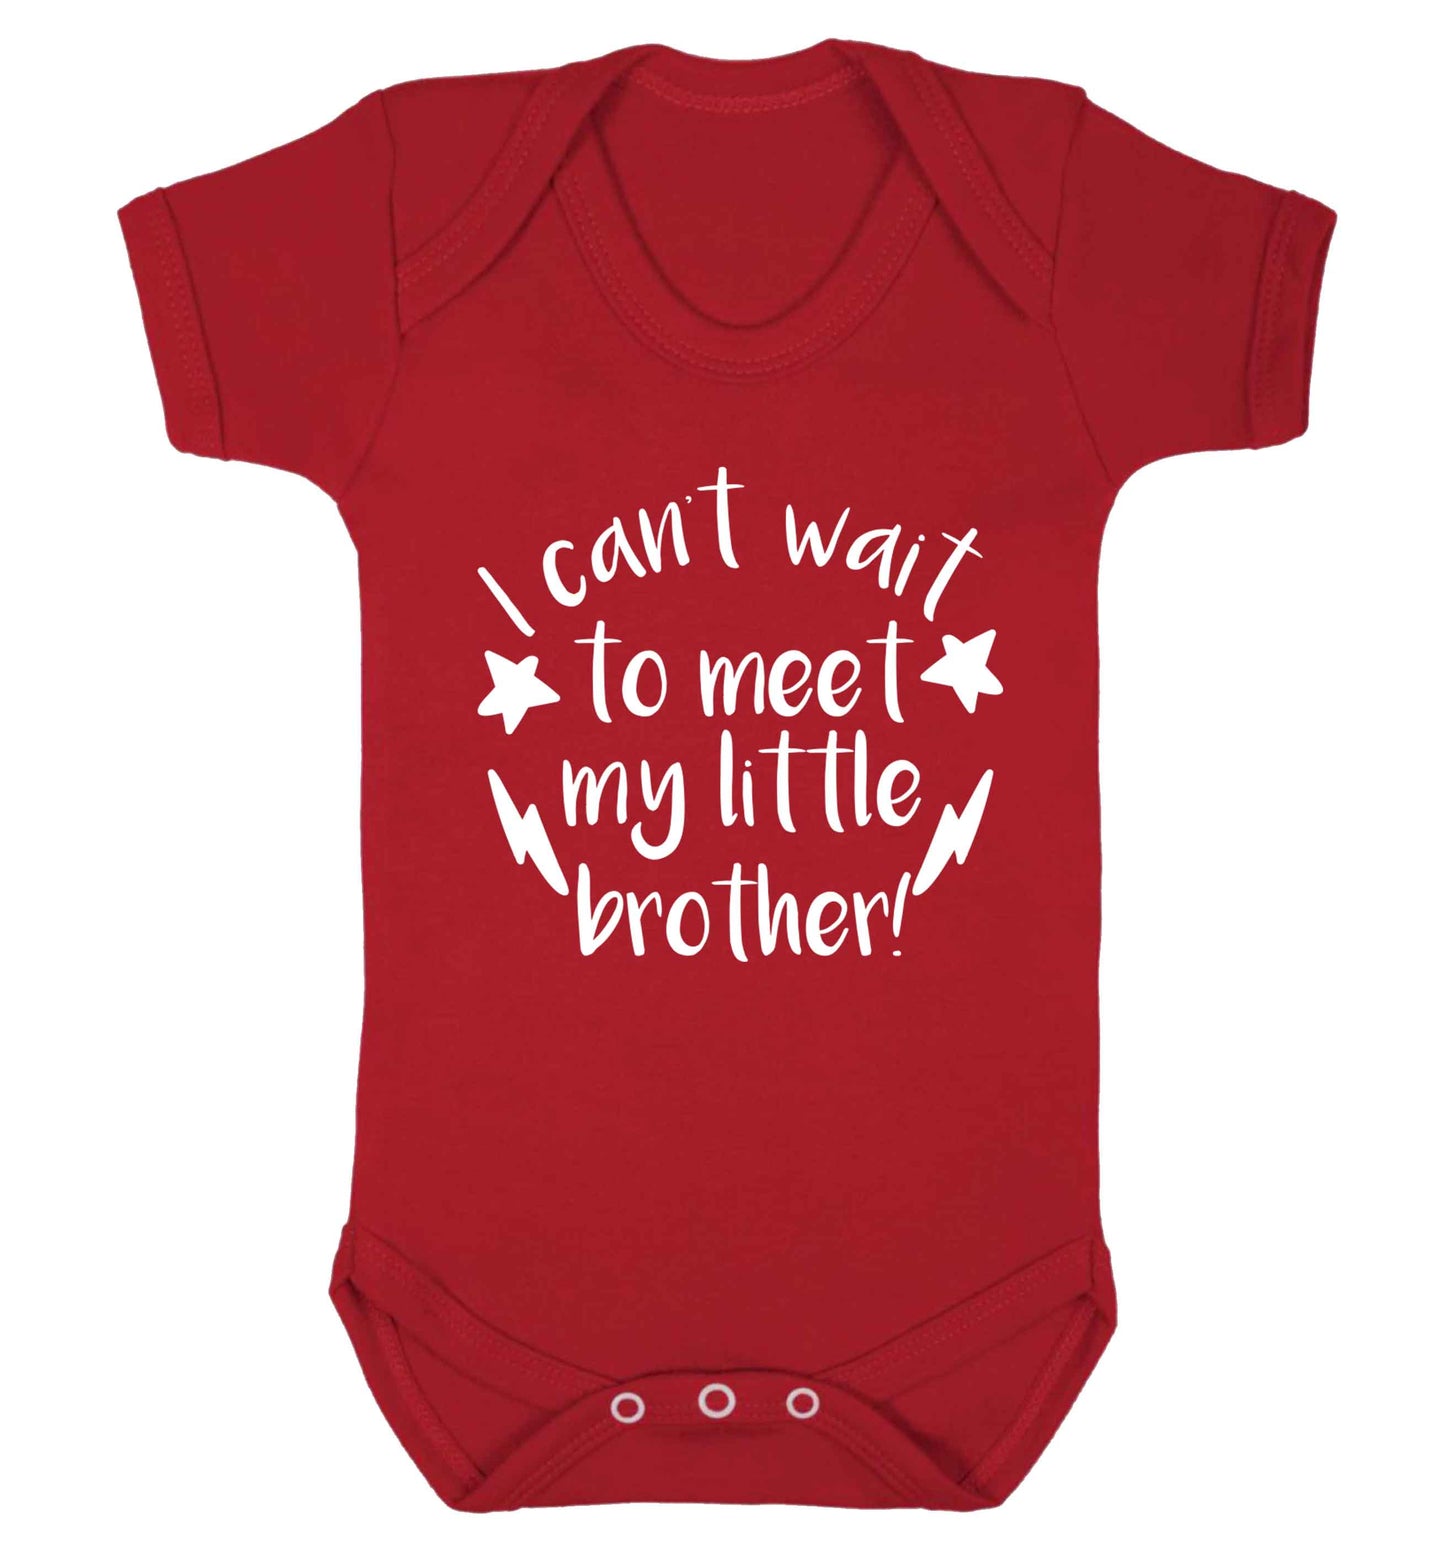 I can't wait to meet my sister! Baby Vest red 18-24 months